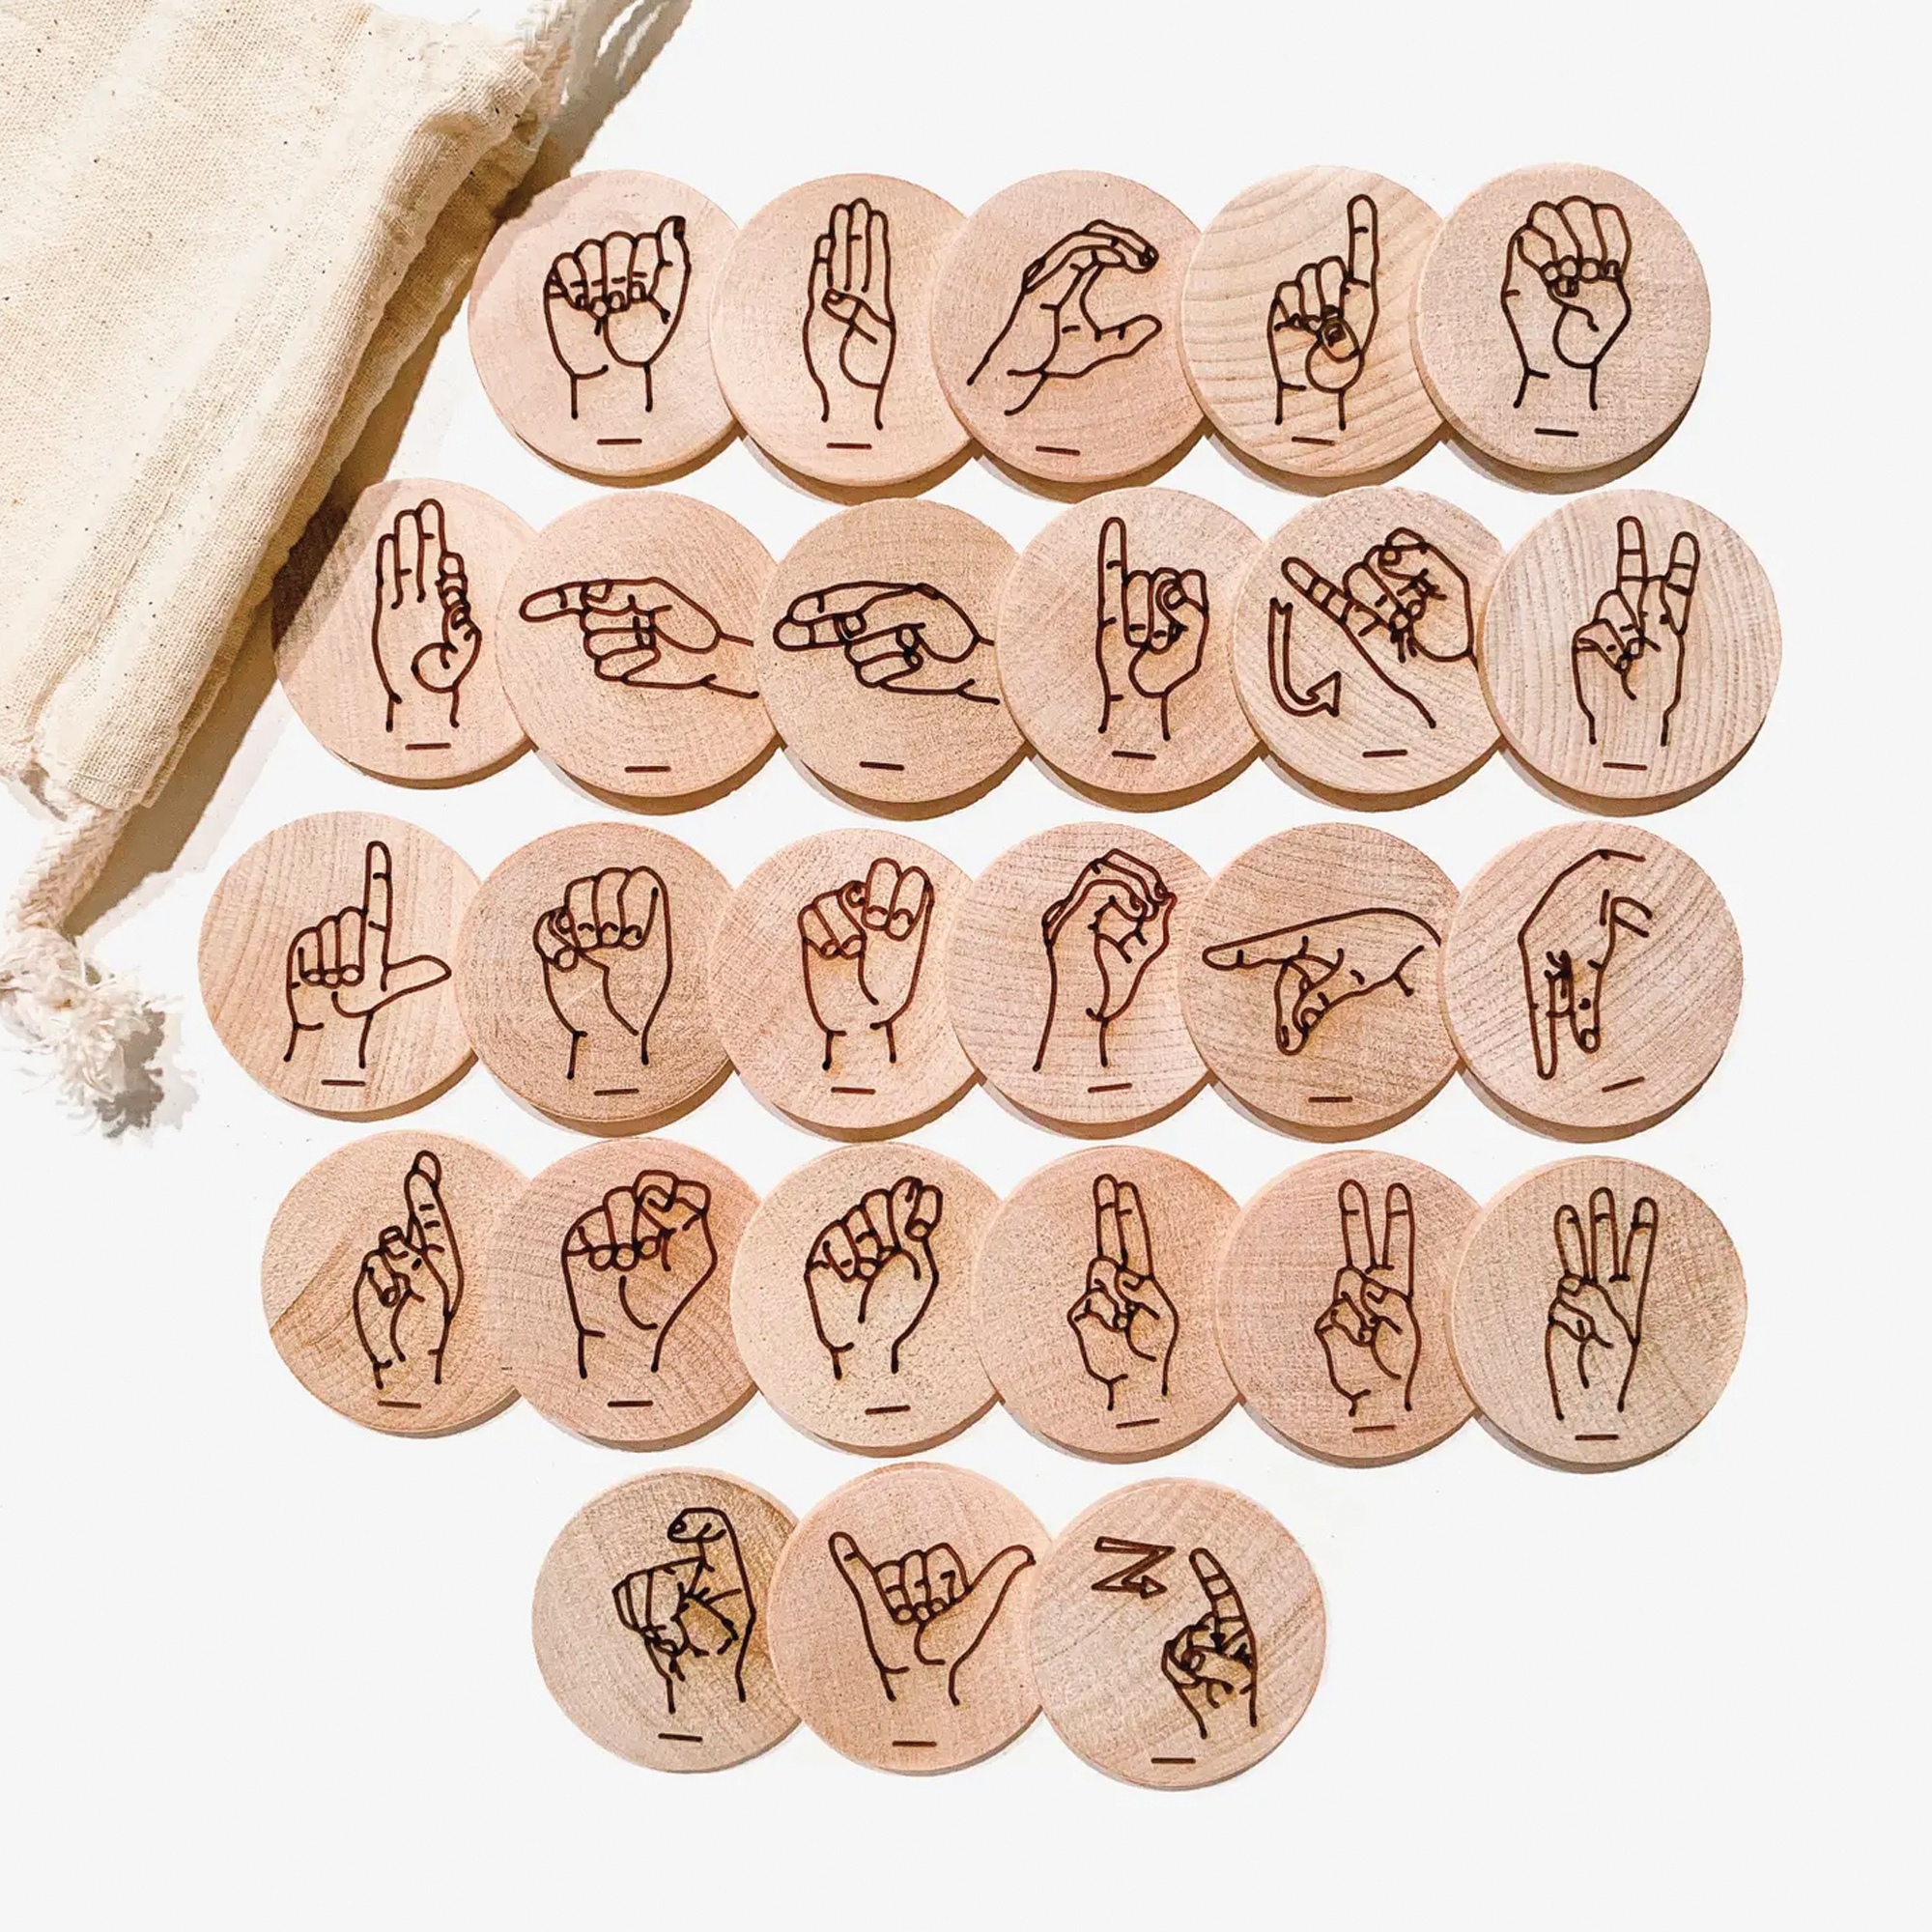 Sign Language Alphabet Discs - Double Sided with Uppercase Letters